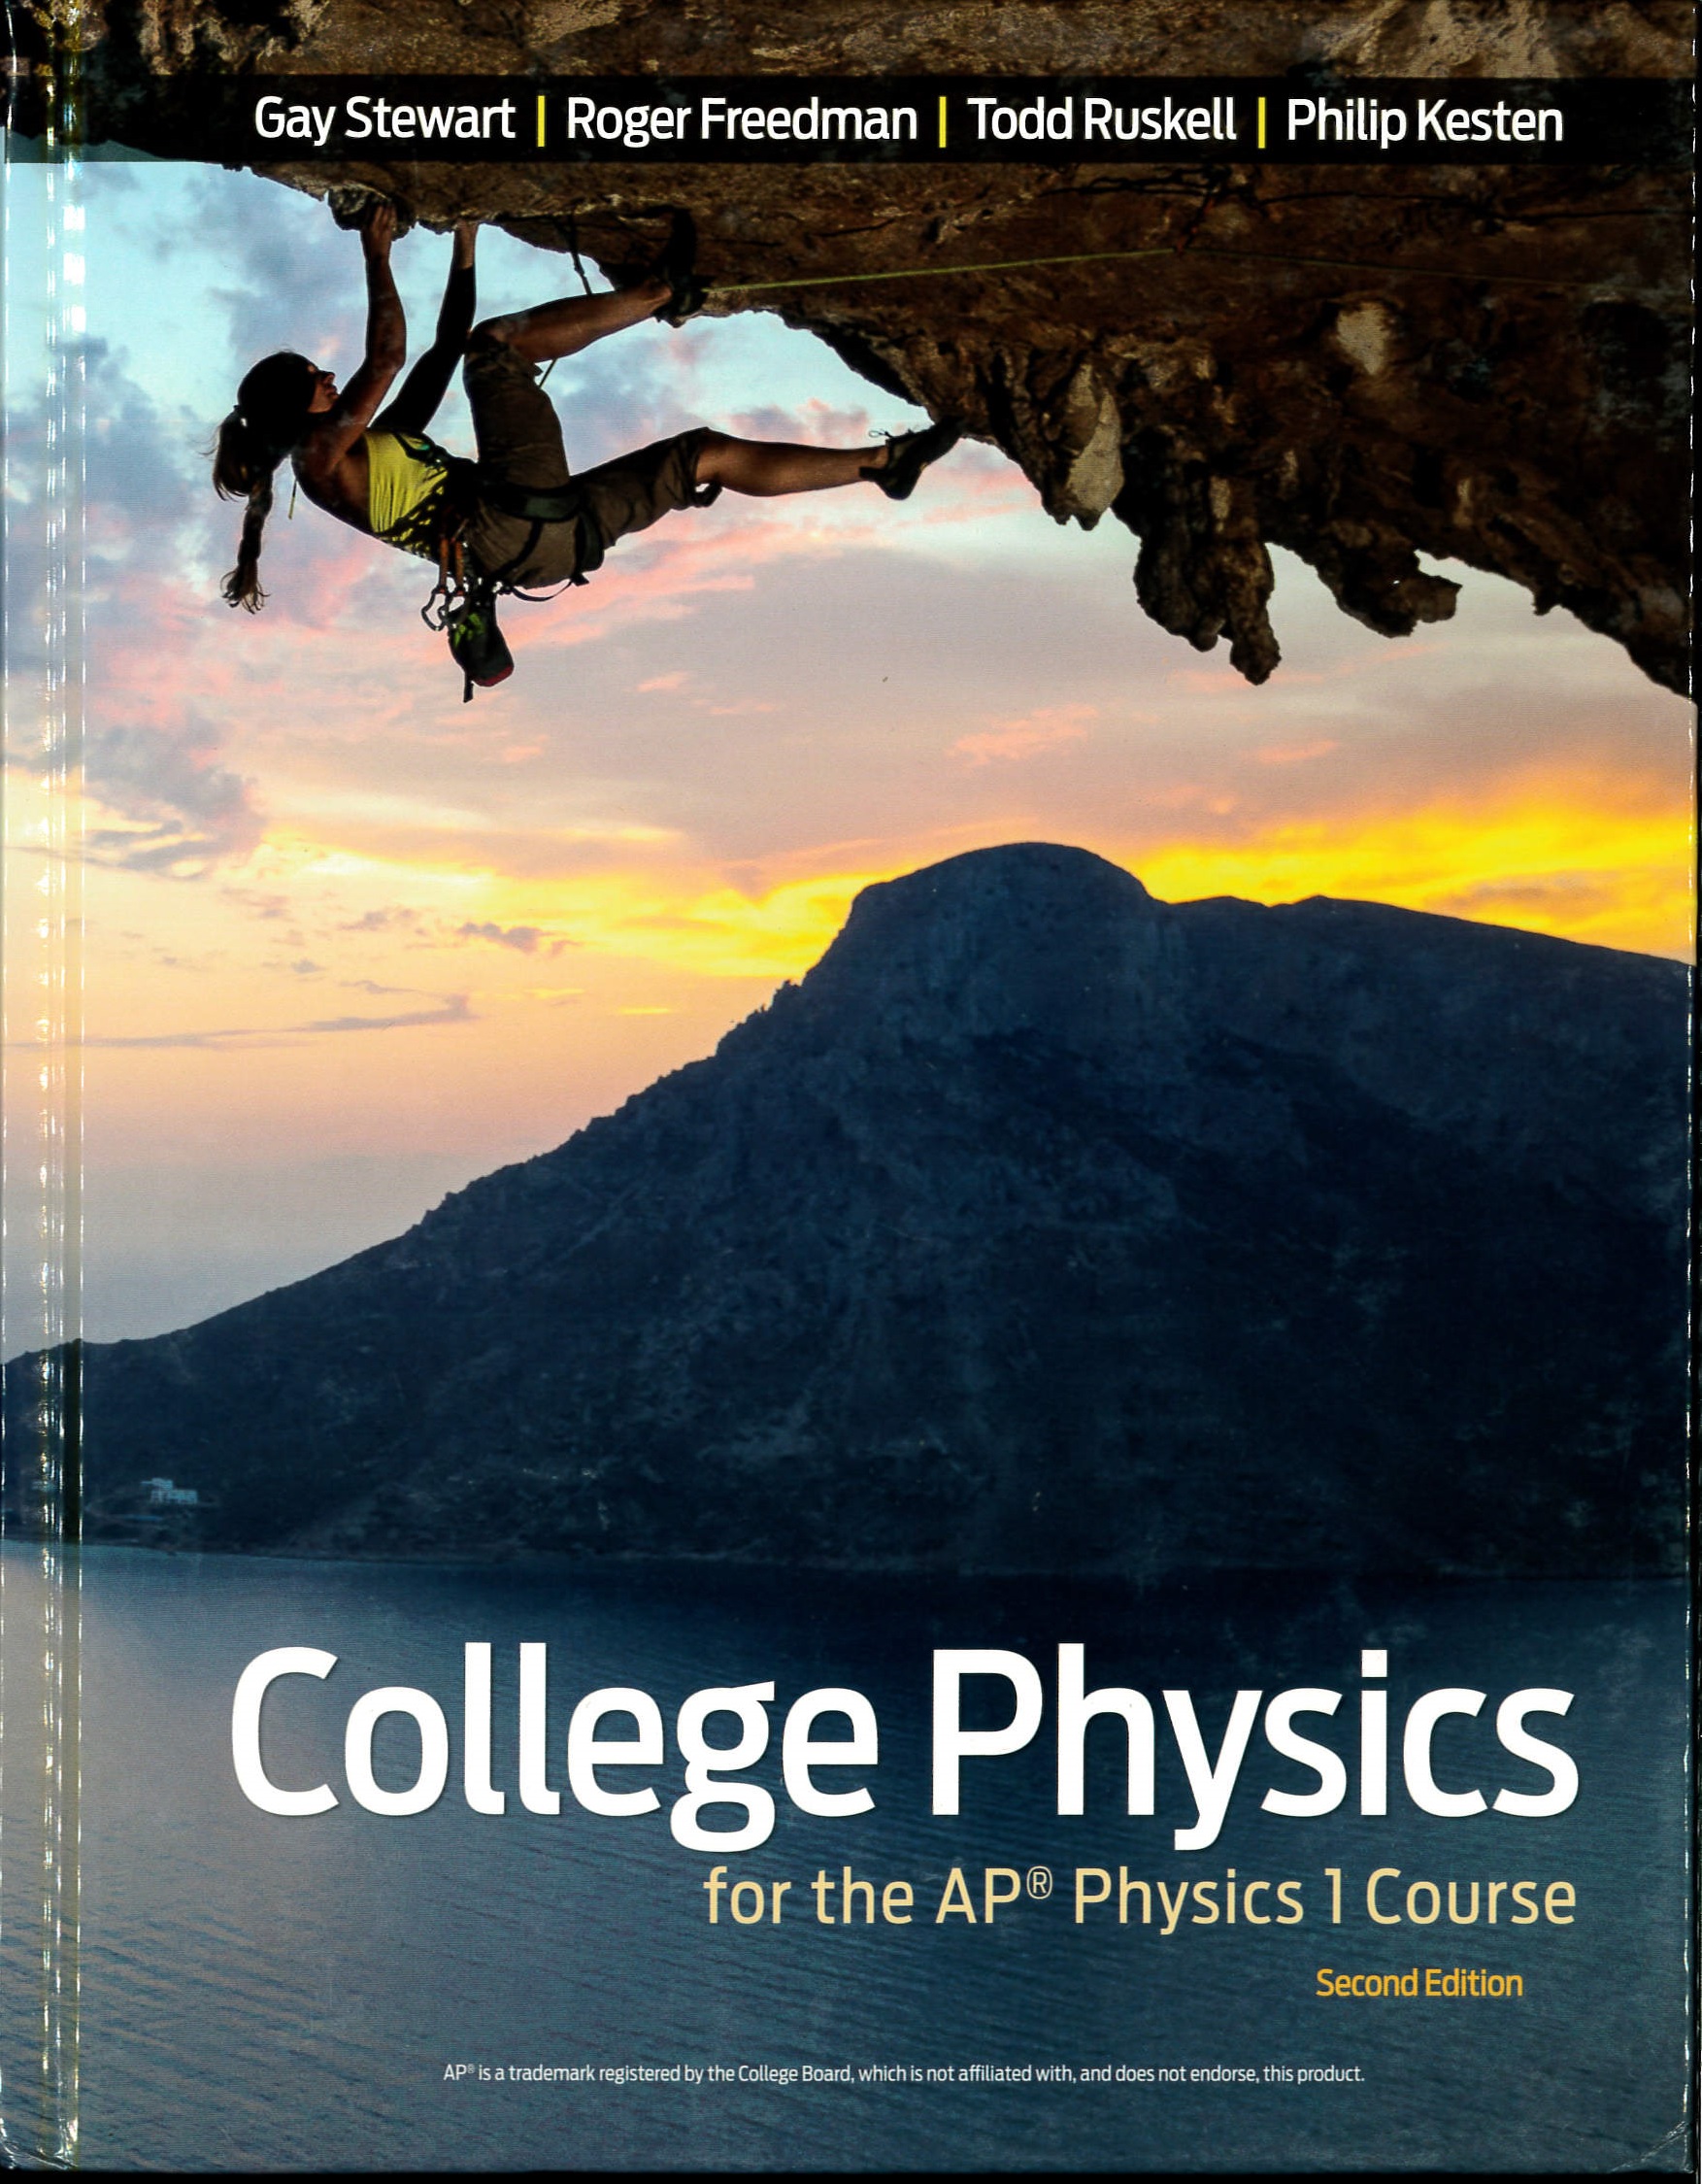 College physics for the AP physics 1 course